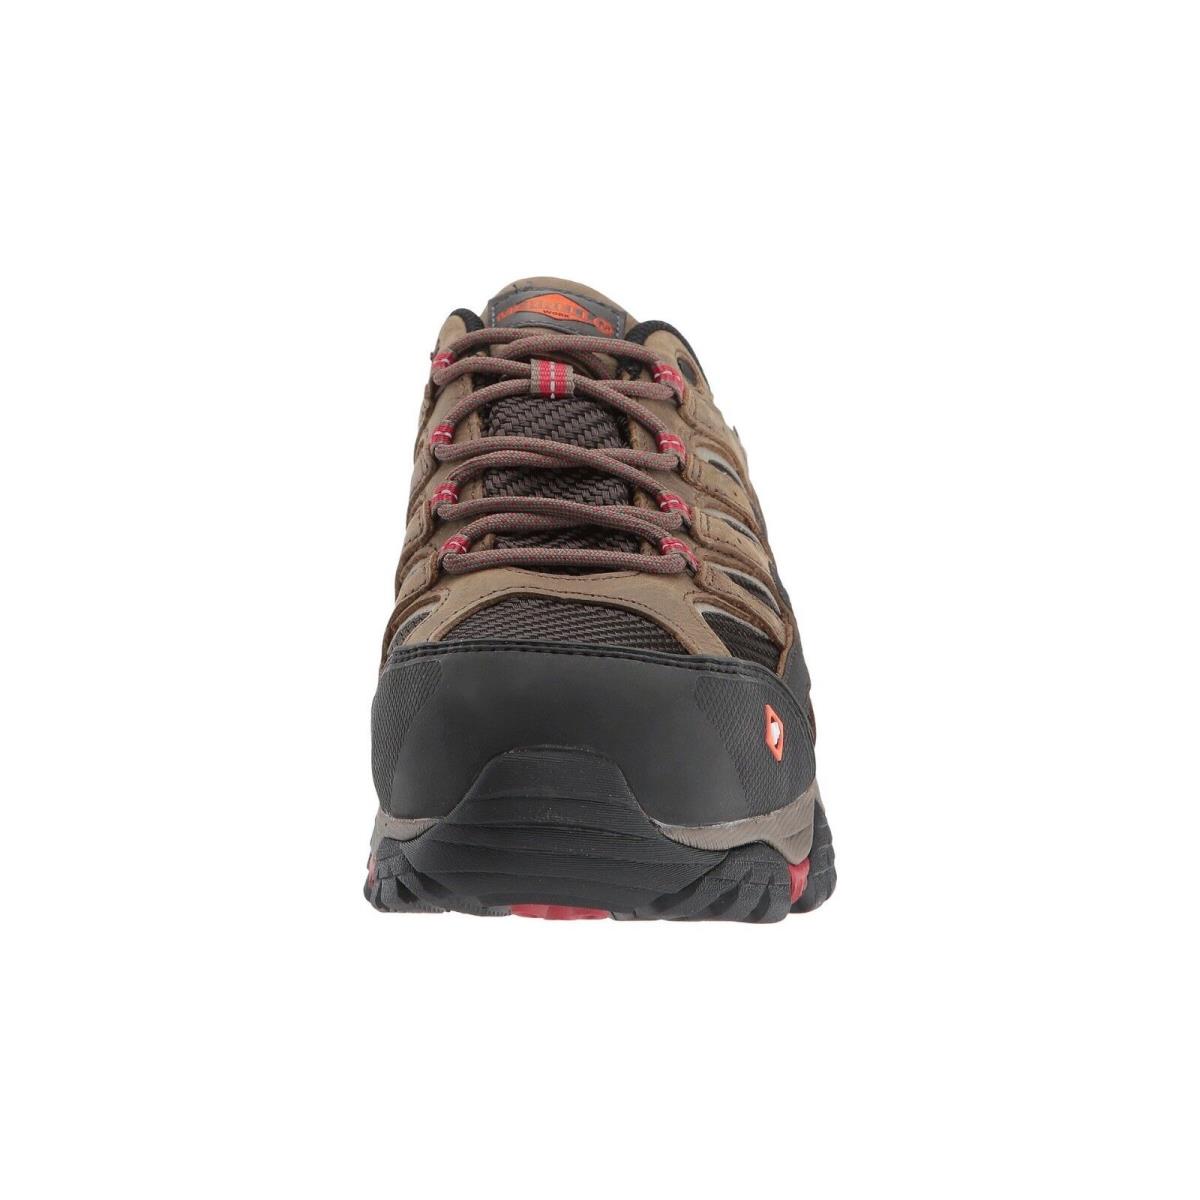 Merrell shoes  - Brown 4